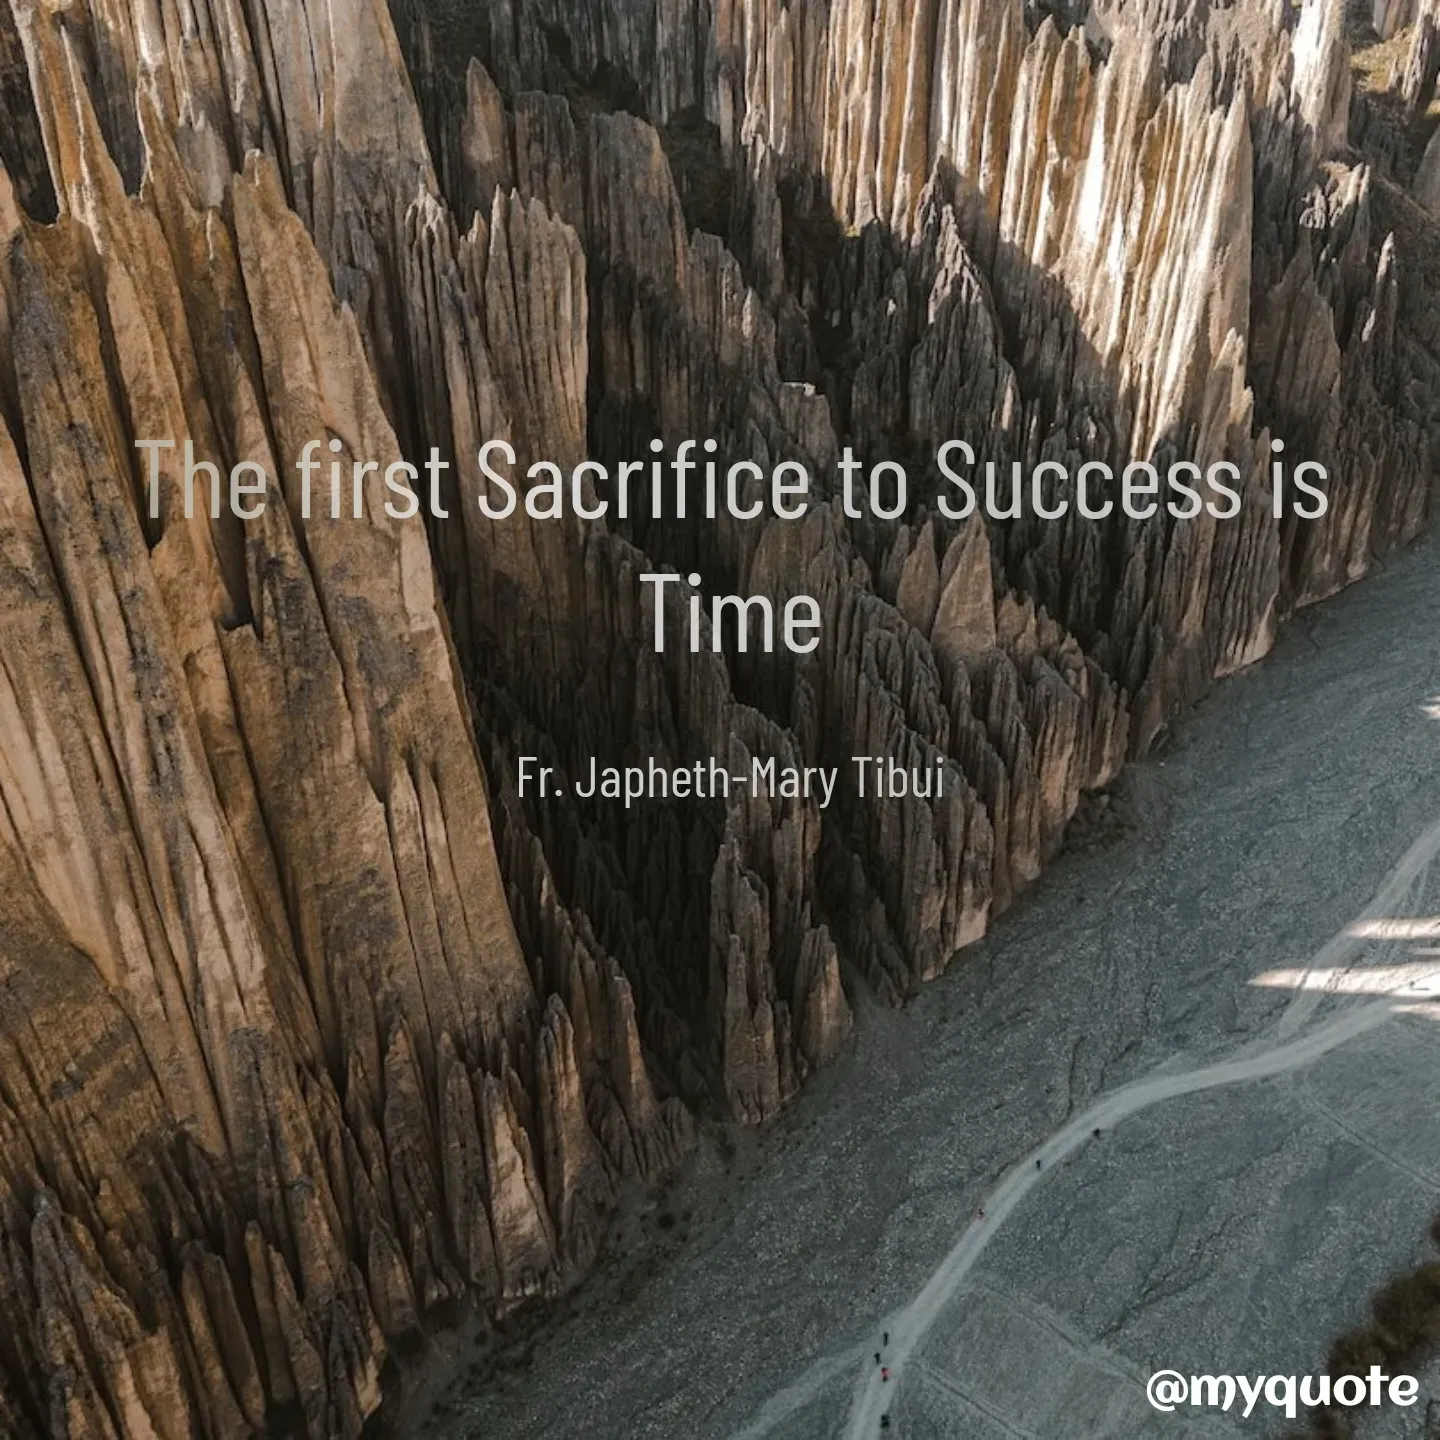 Quote by Fr. Japheth Tibui - The first Sacrifice to Success is Time

Fr. Japheth-Mary Tibui - Made using Quotes Creator App, Post Maker App